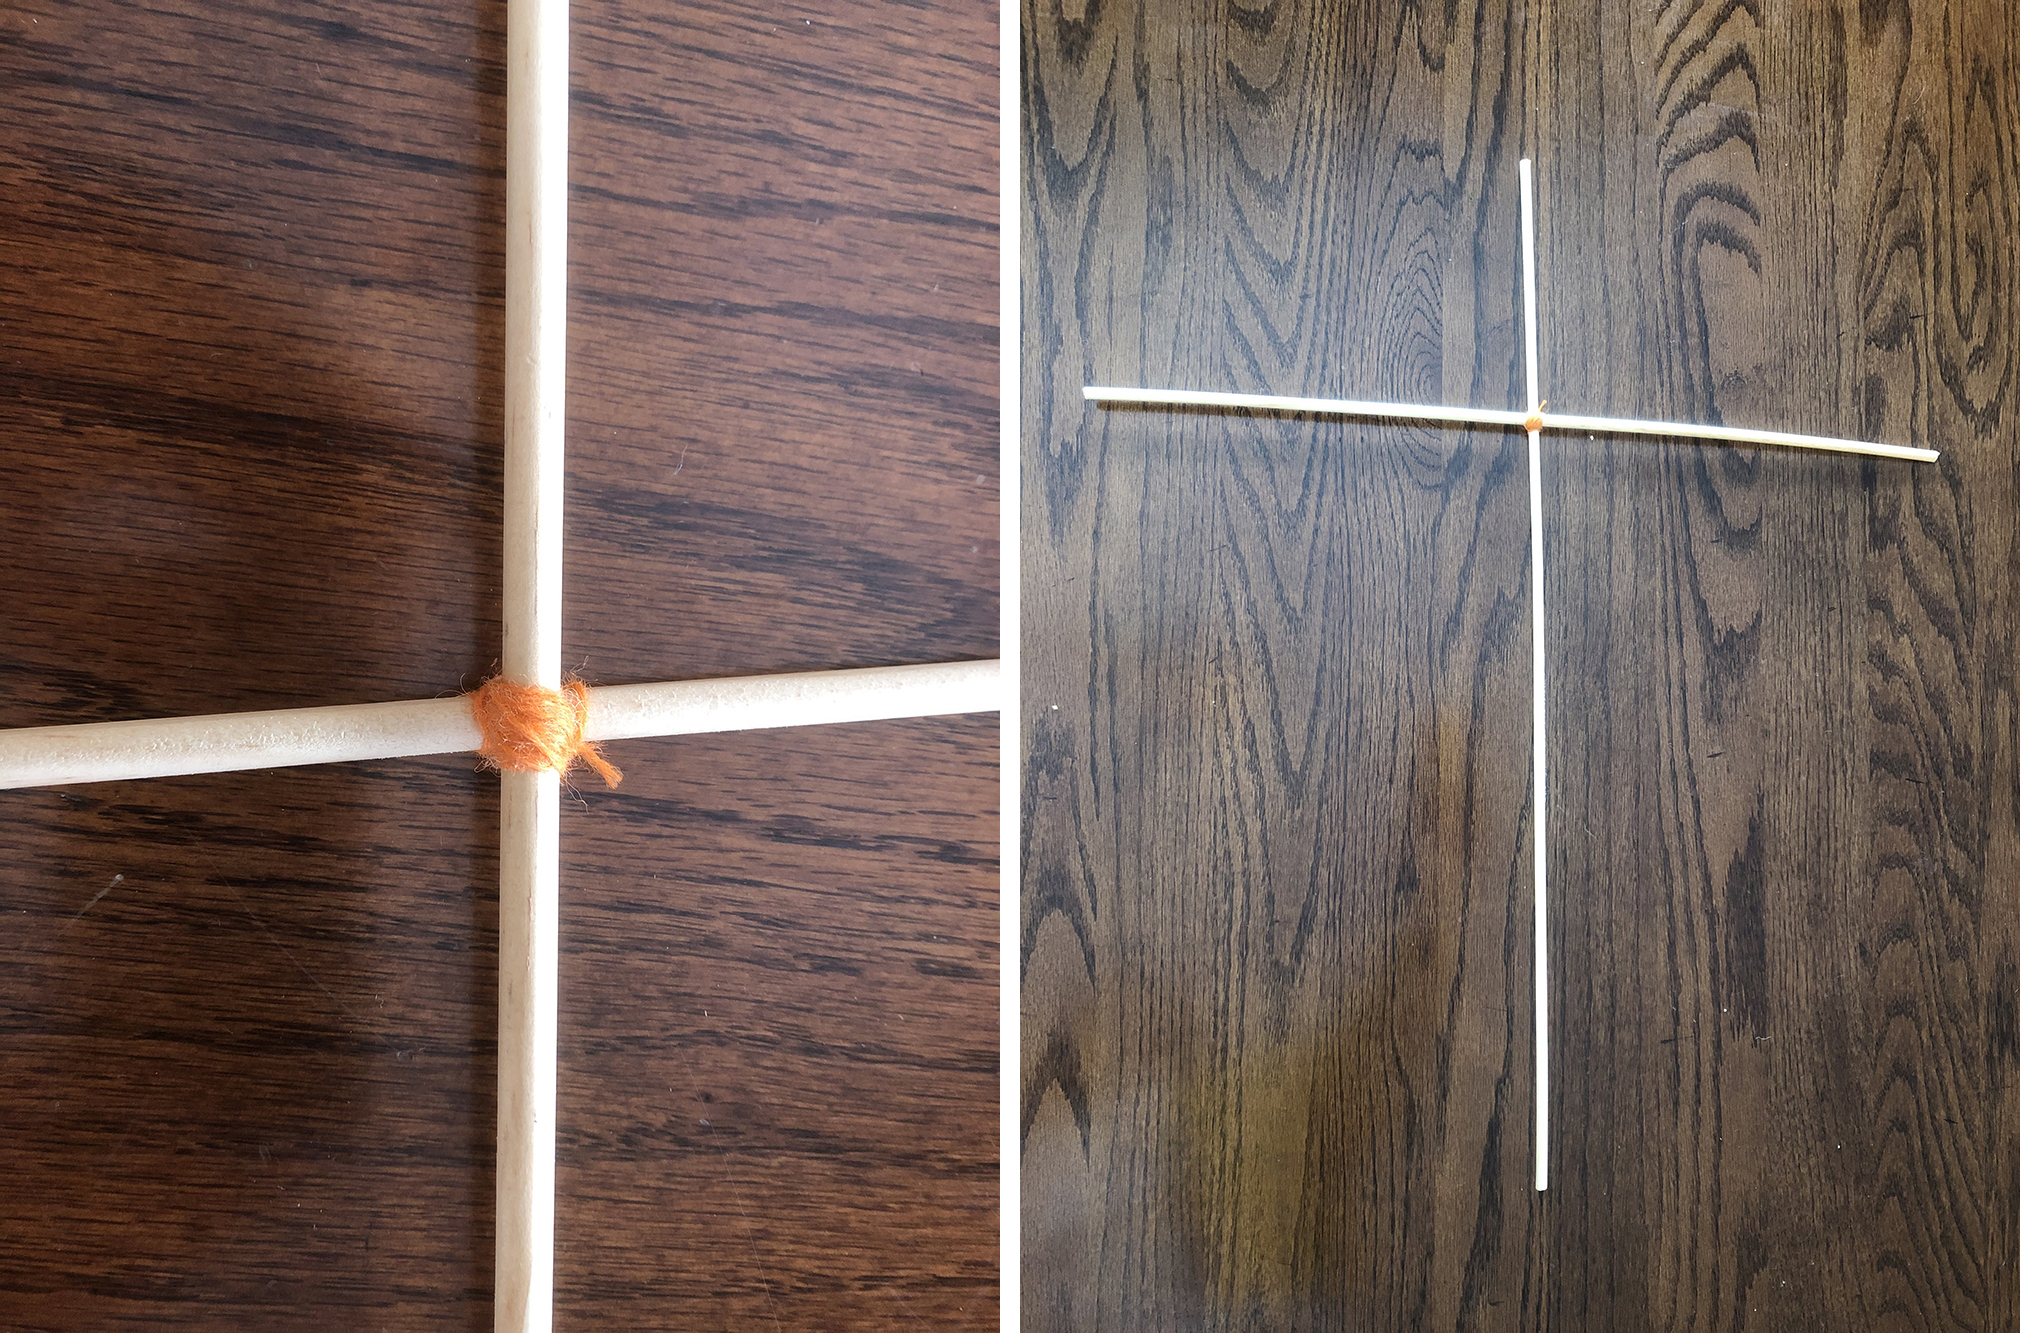 dowels crossed together and tied with string